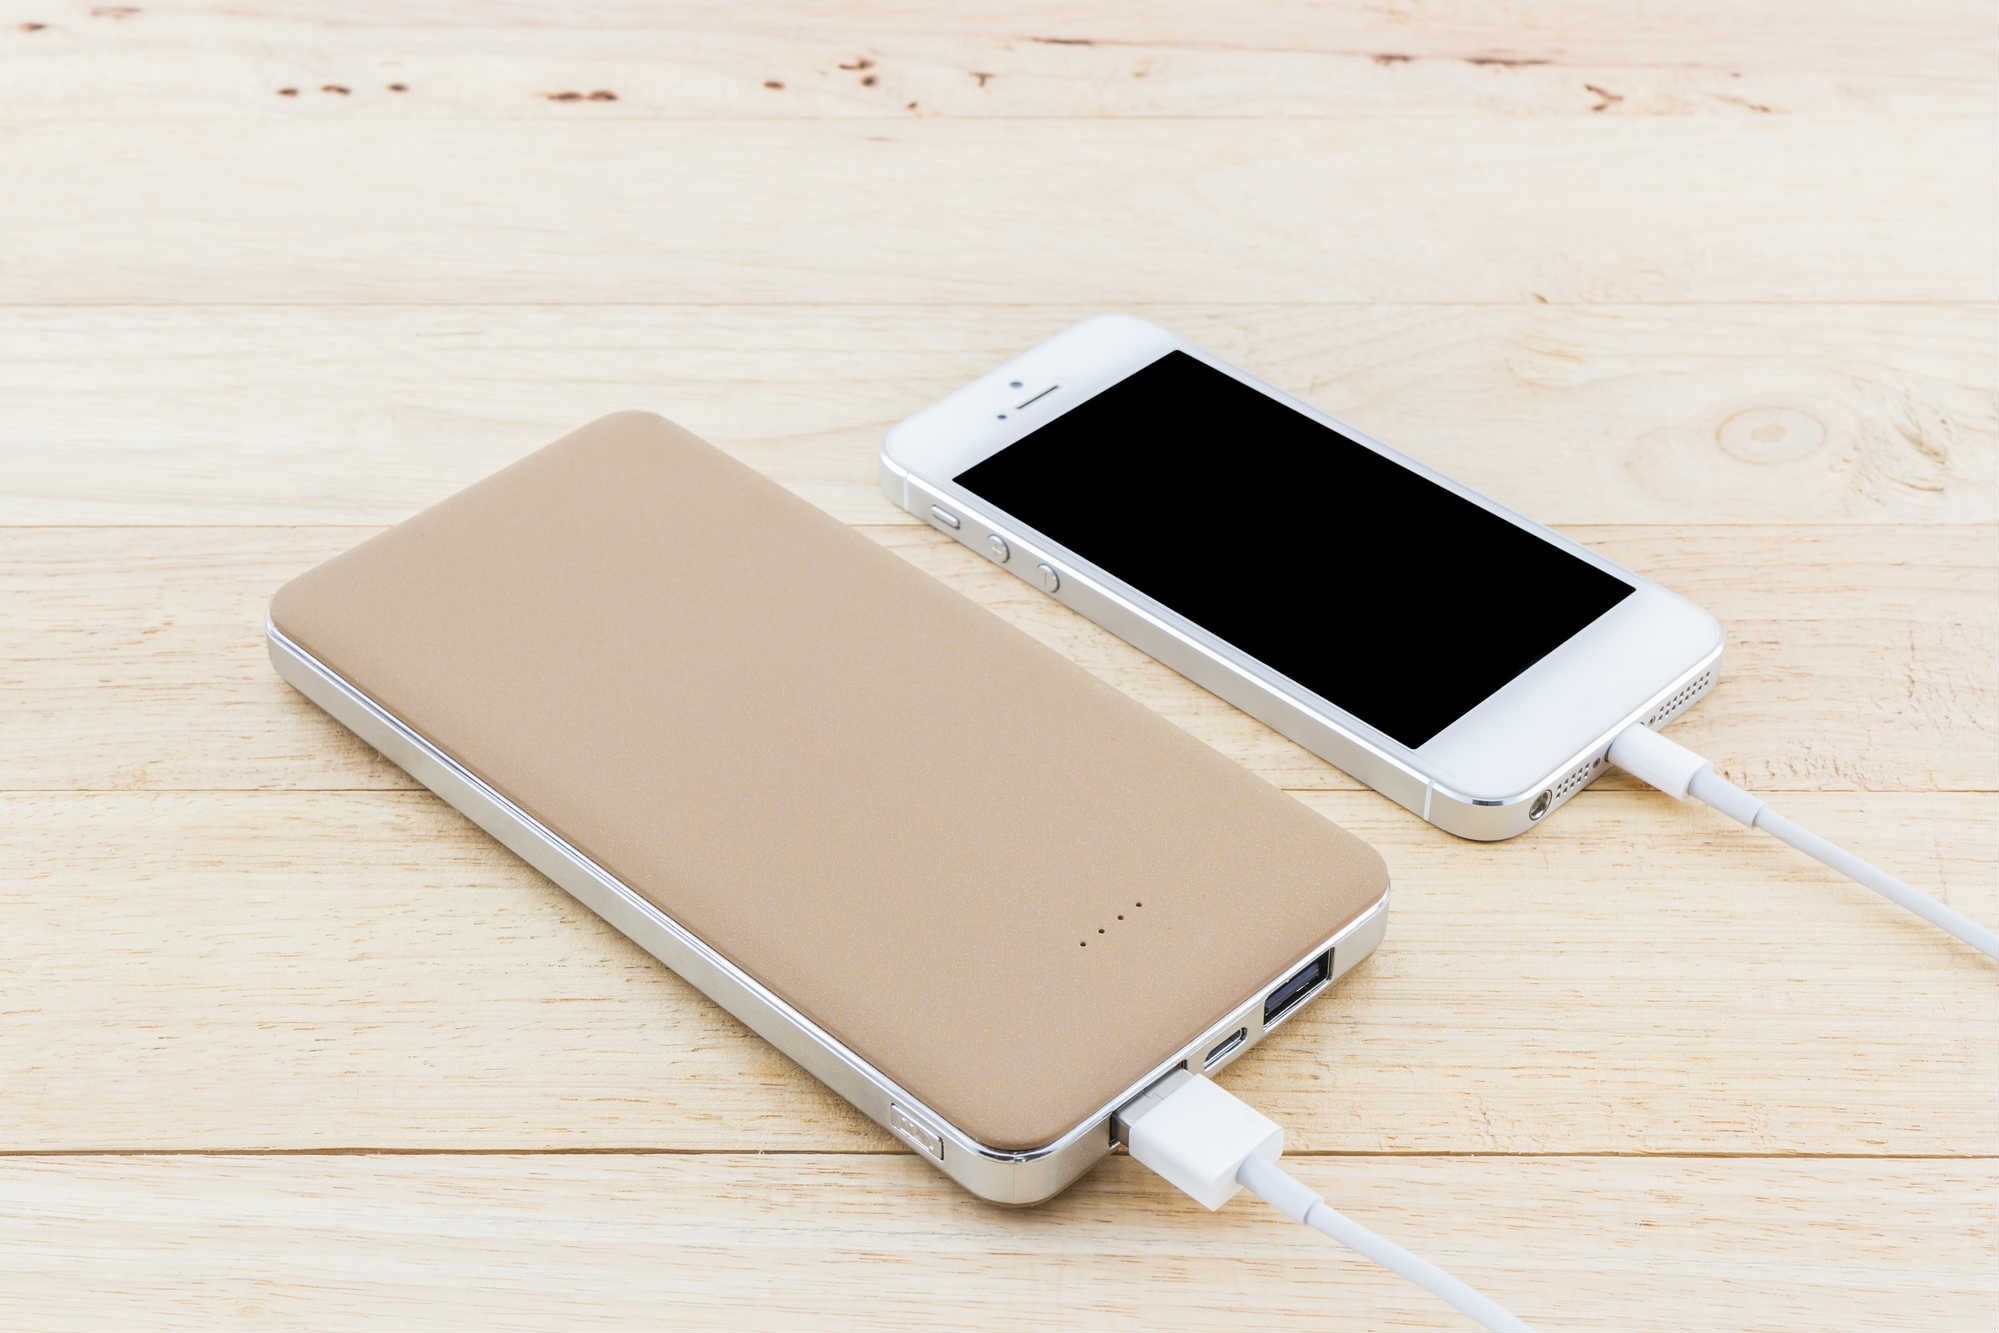 PNY Class Action Challenges Power Bank Charge - Top Class Actions